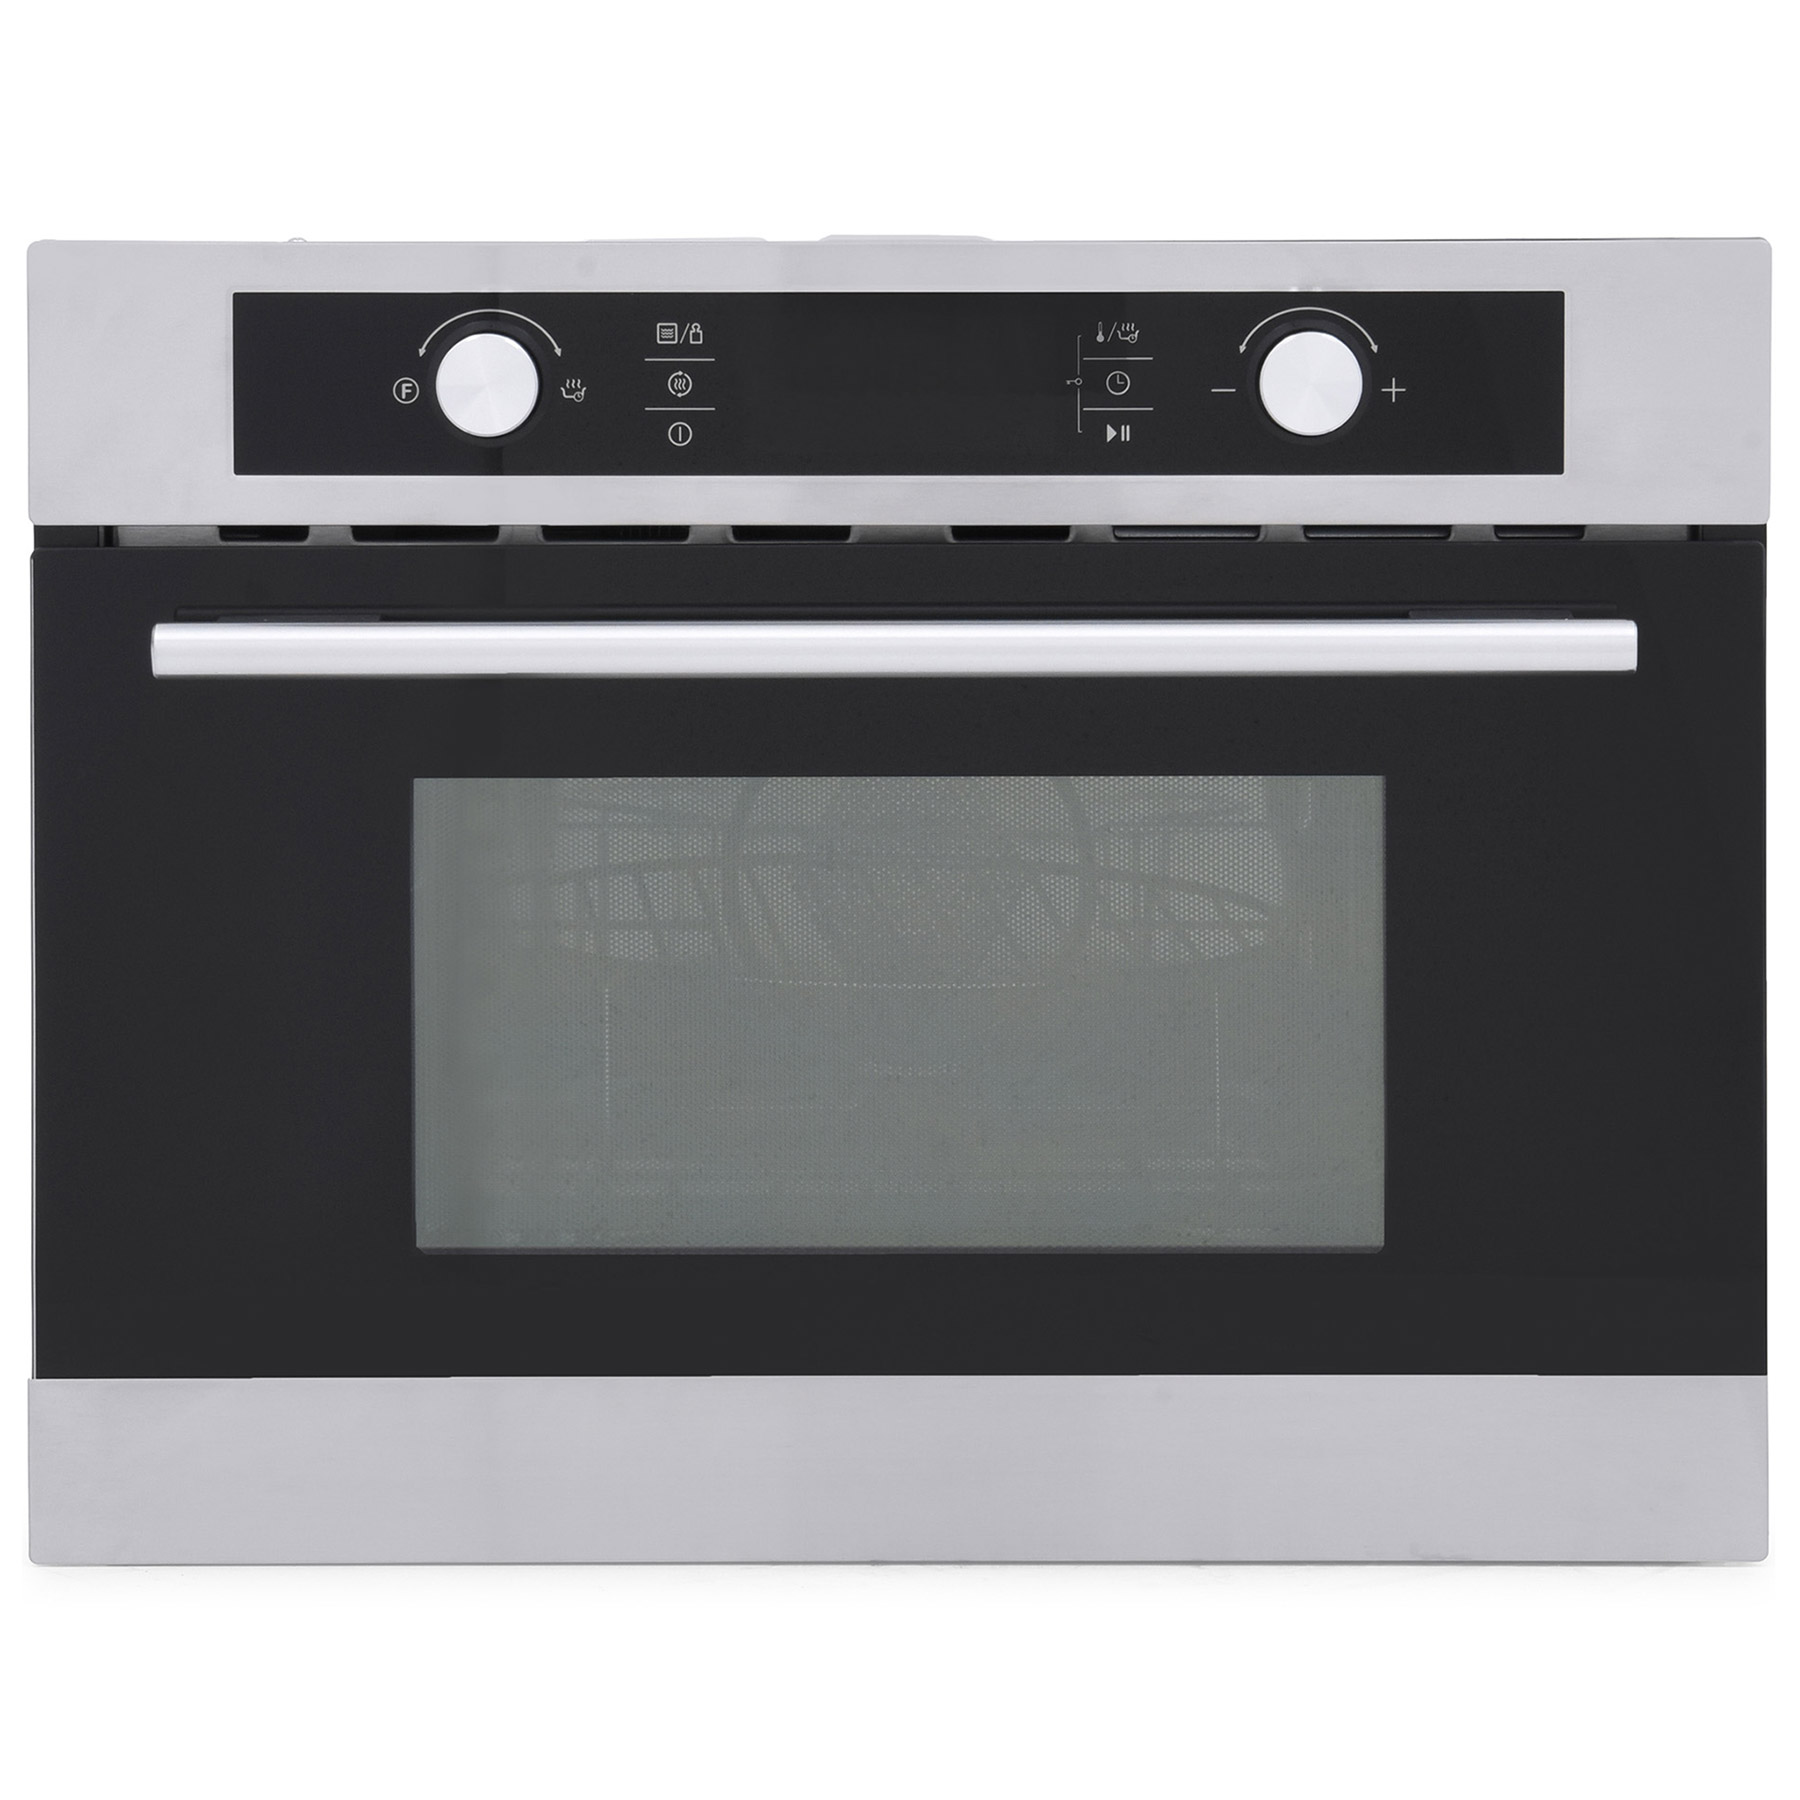 Montpellier MWBIC90044 Built In Combi Microwave Oven in St Steel 900W